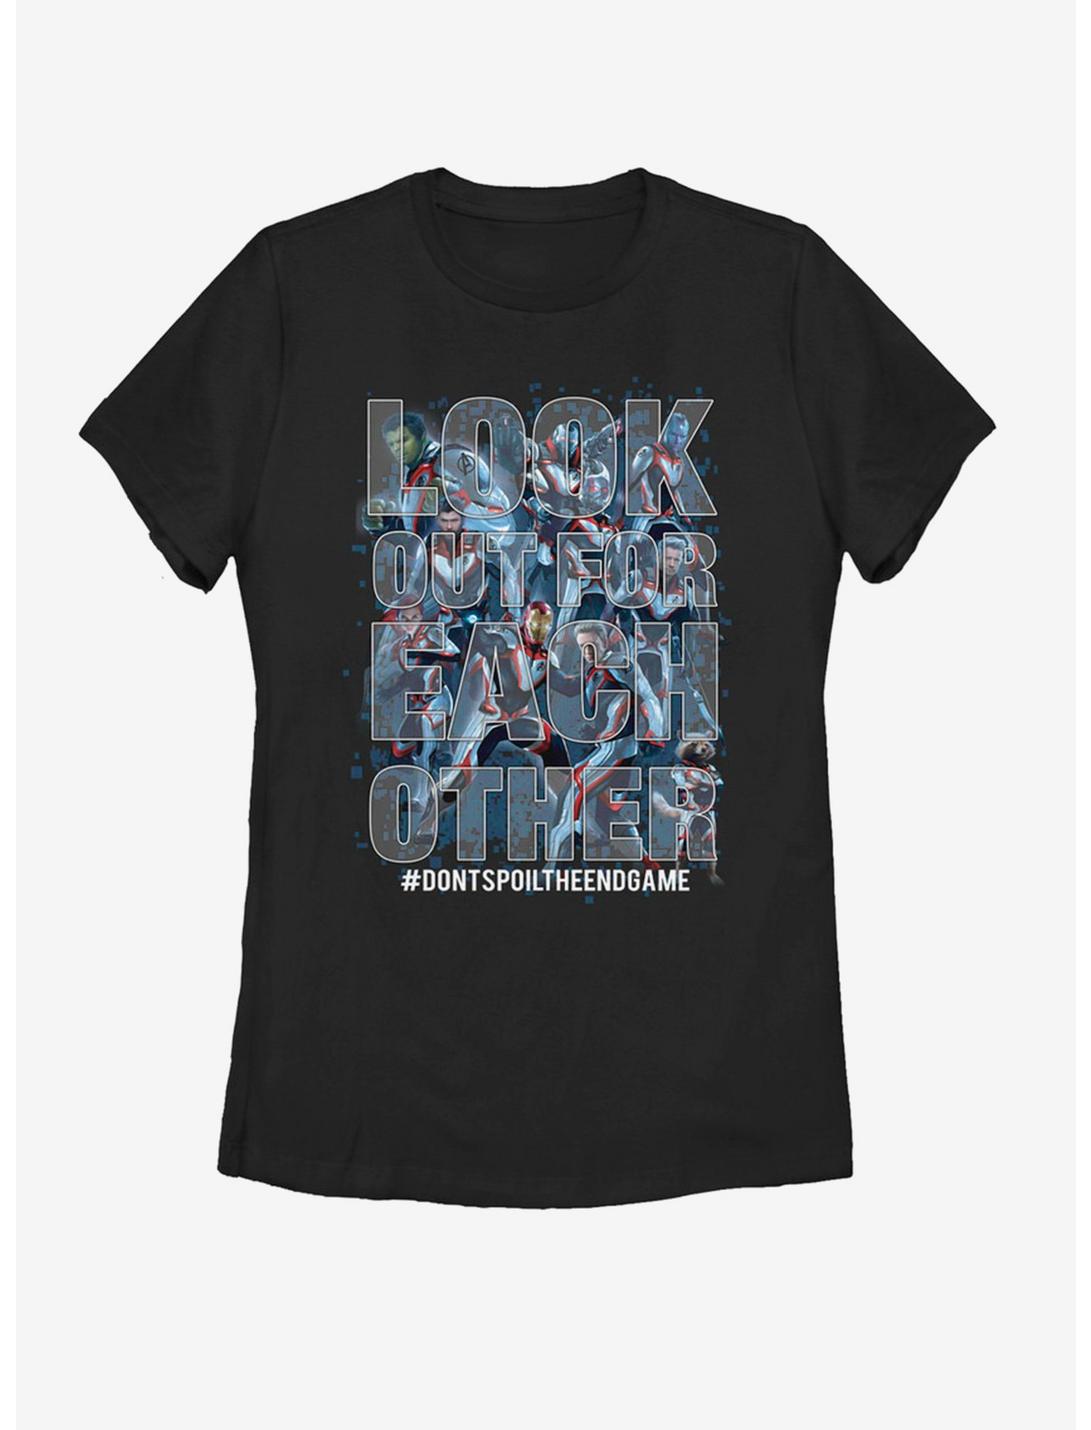 Marvel Avengers: Endgame Look Out For Each Other Womens T-Shirt, BLACK, hi-res